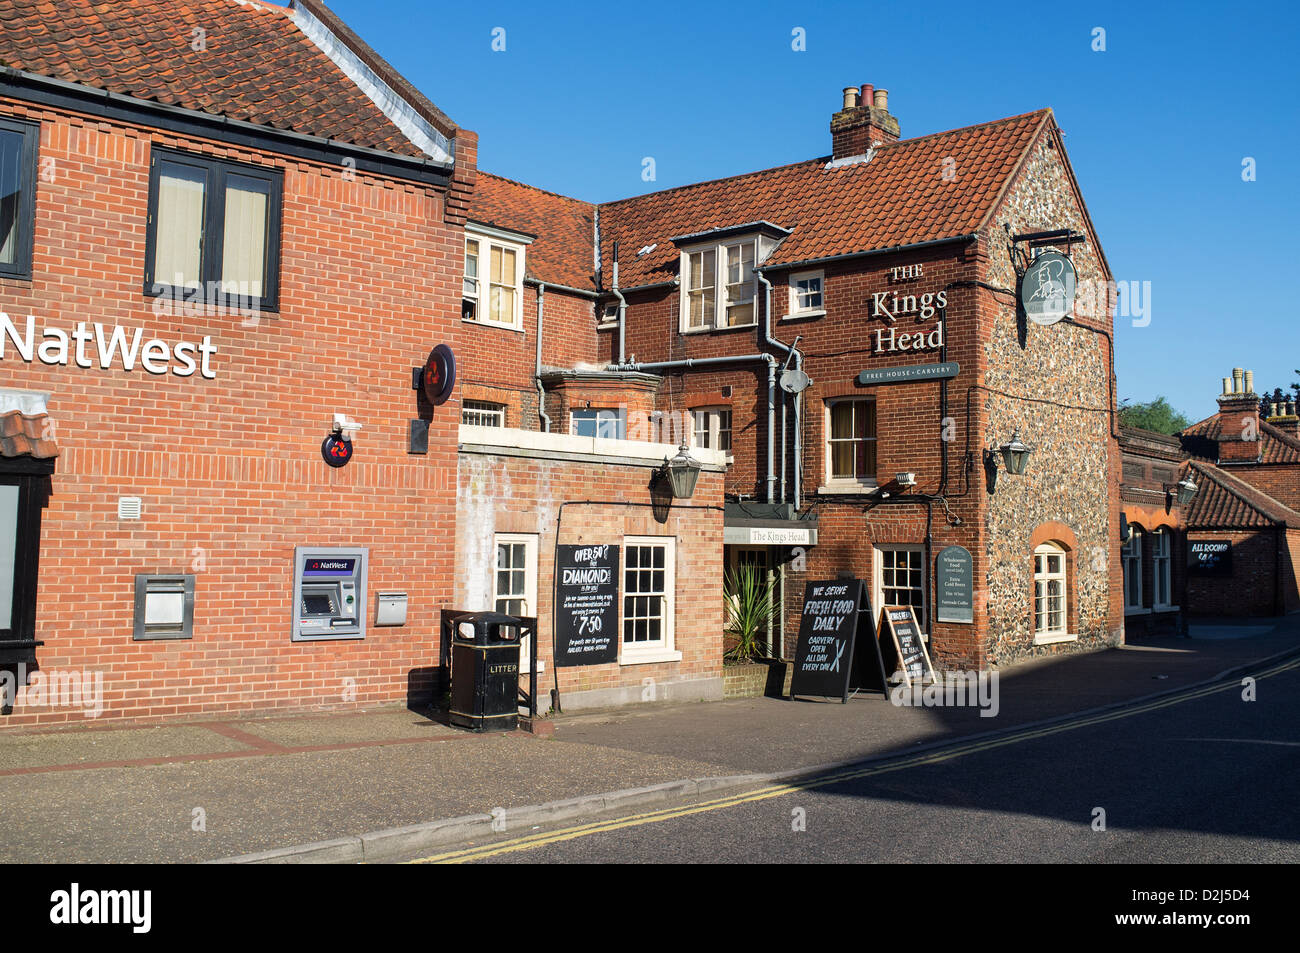 NatWest Bank and King's Head Public House at Wroxham Norfolk UK Stock Photo